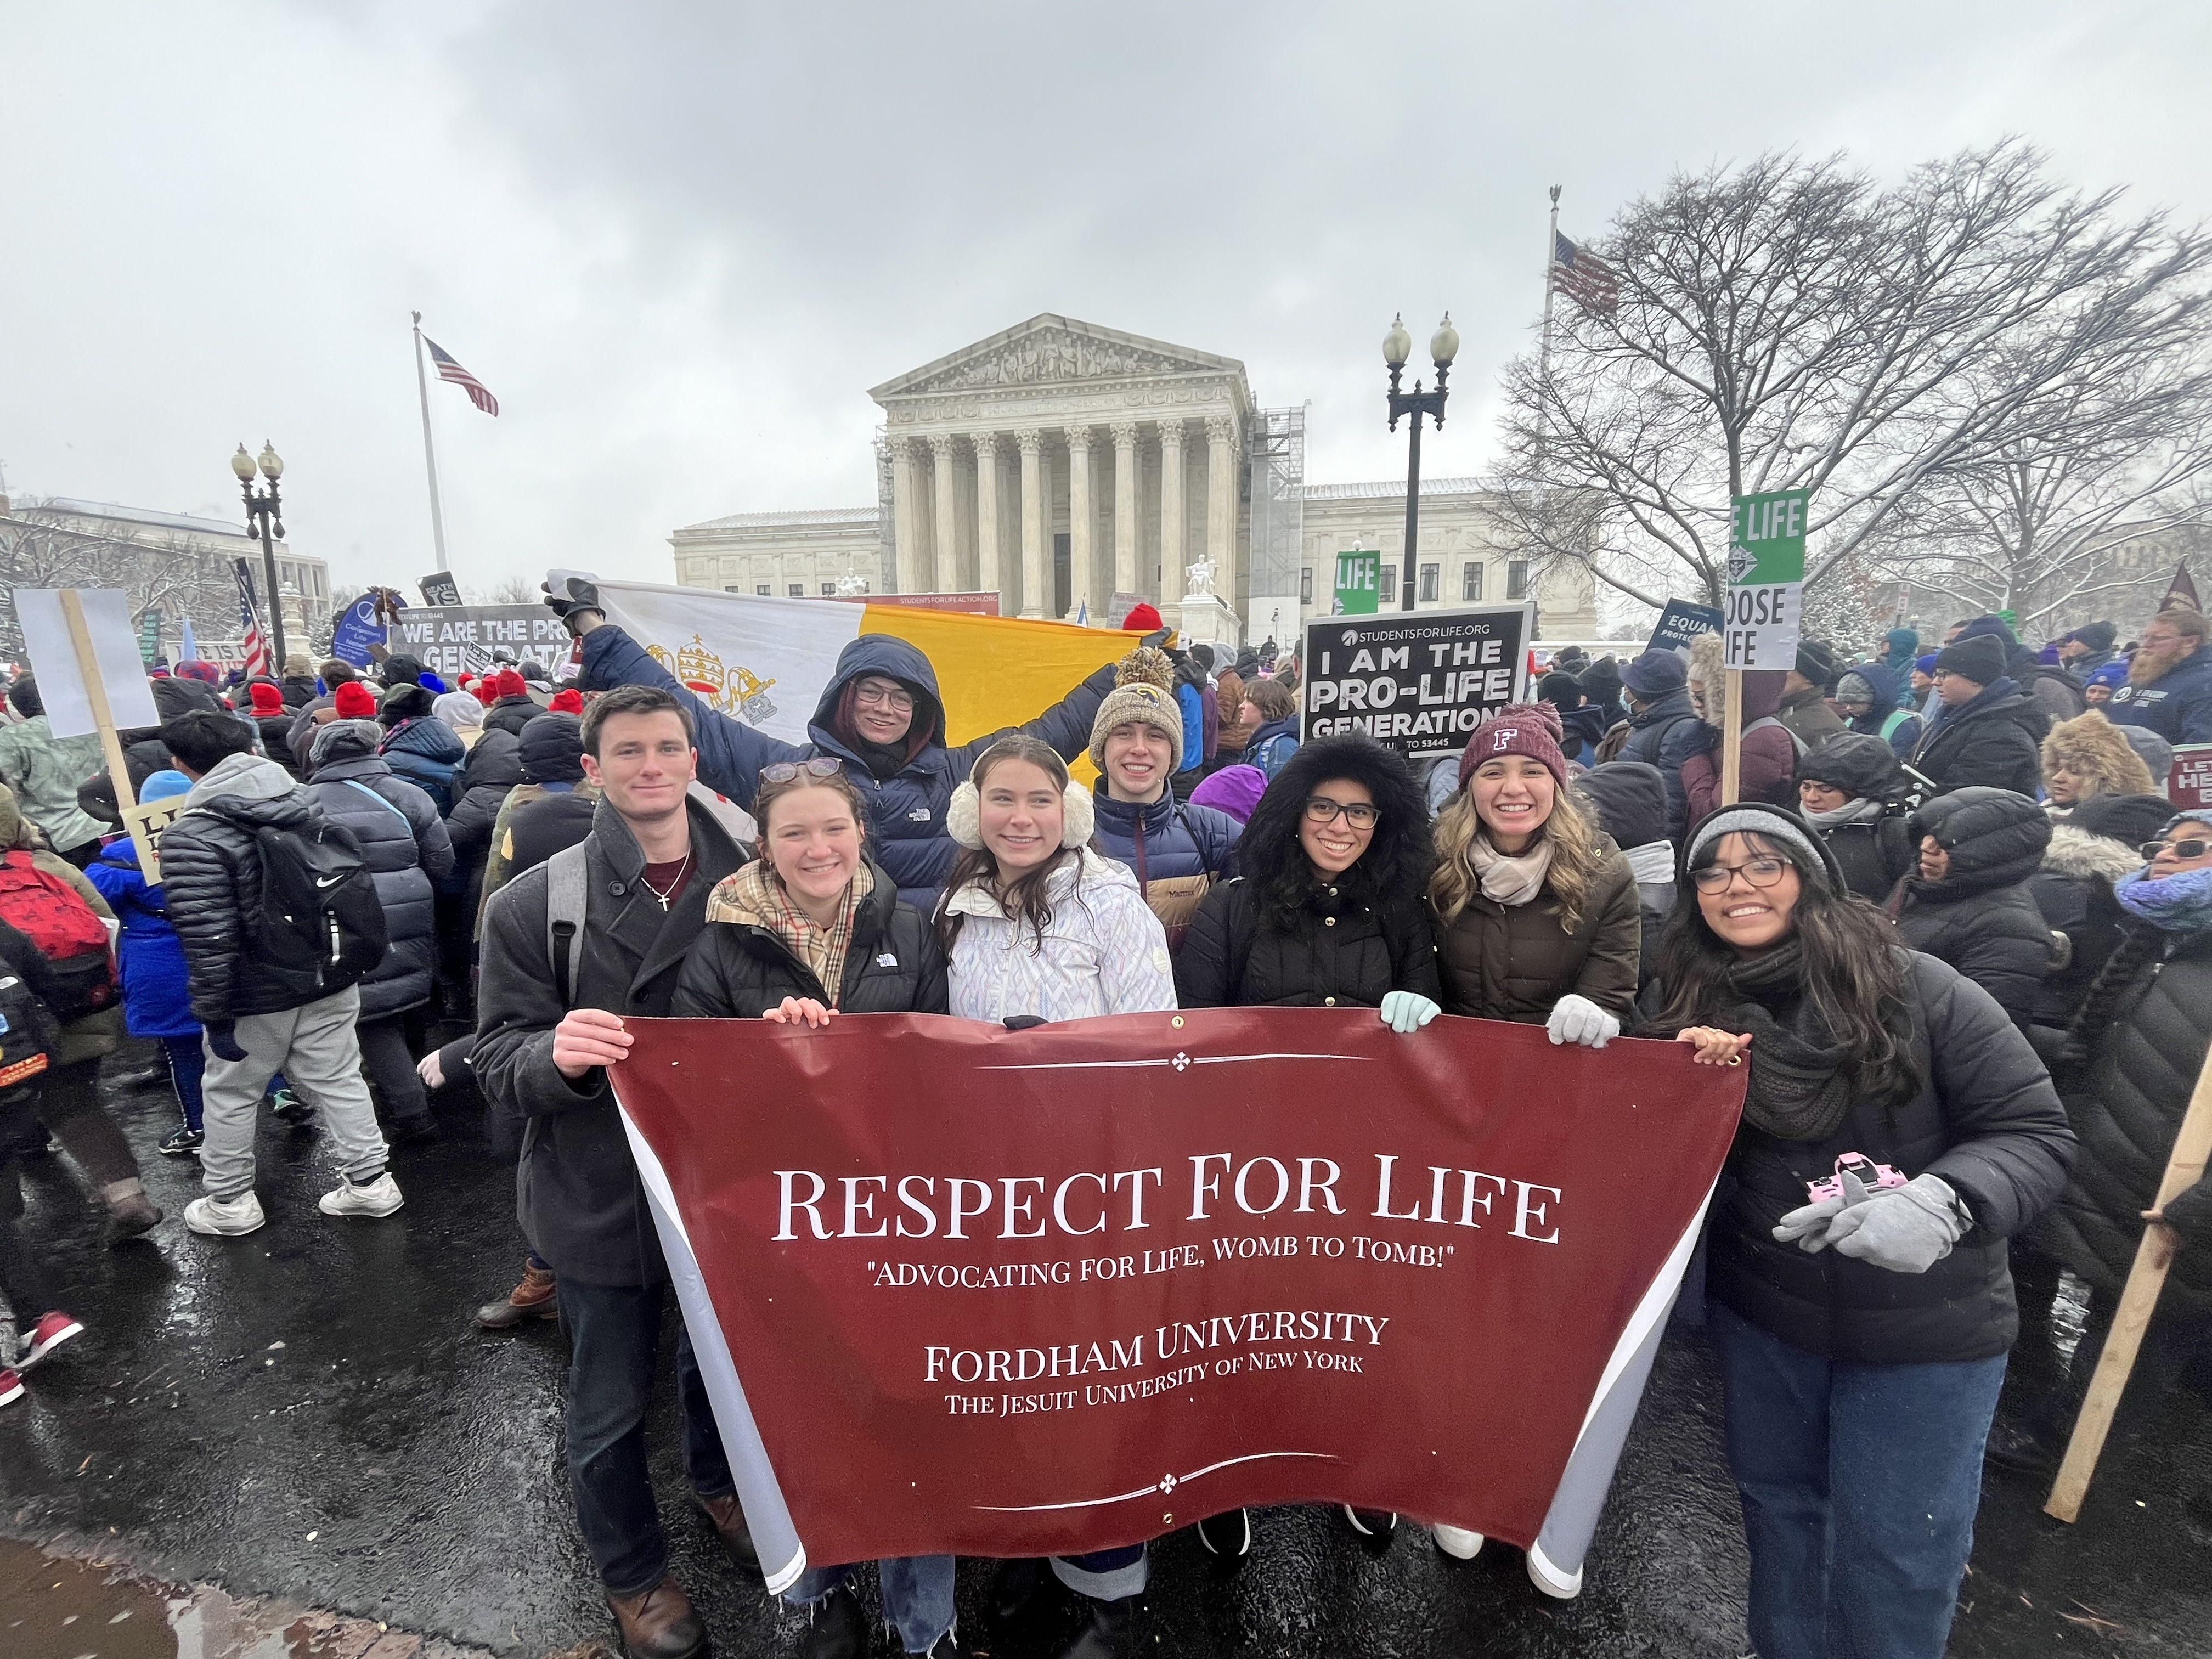 Students, Catholic, Respect for life